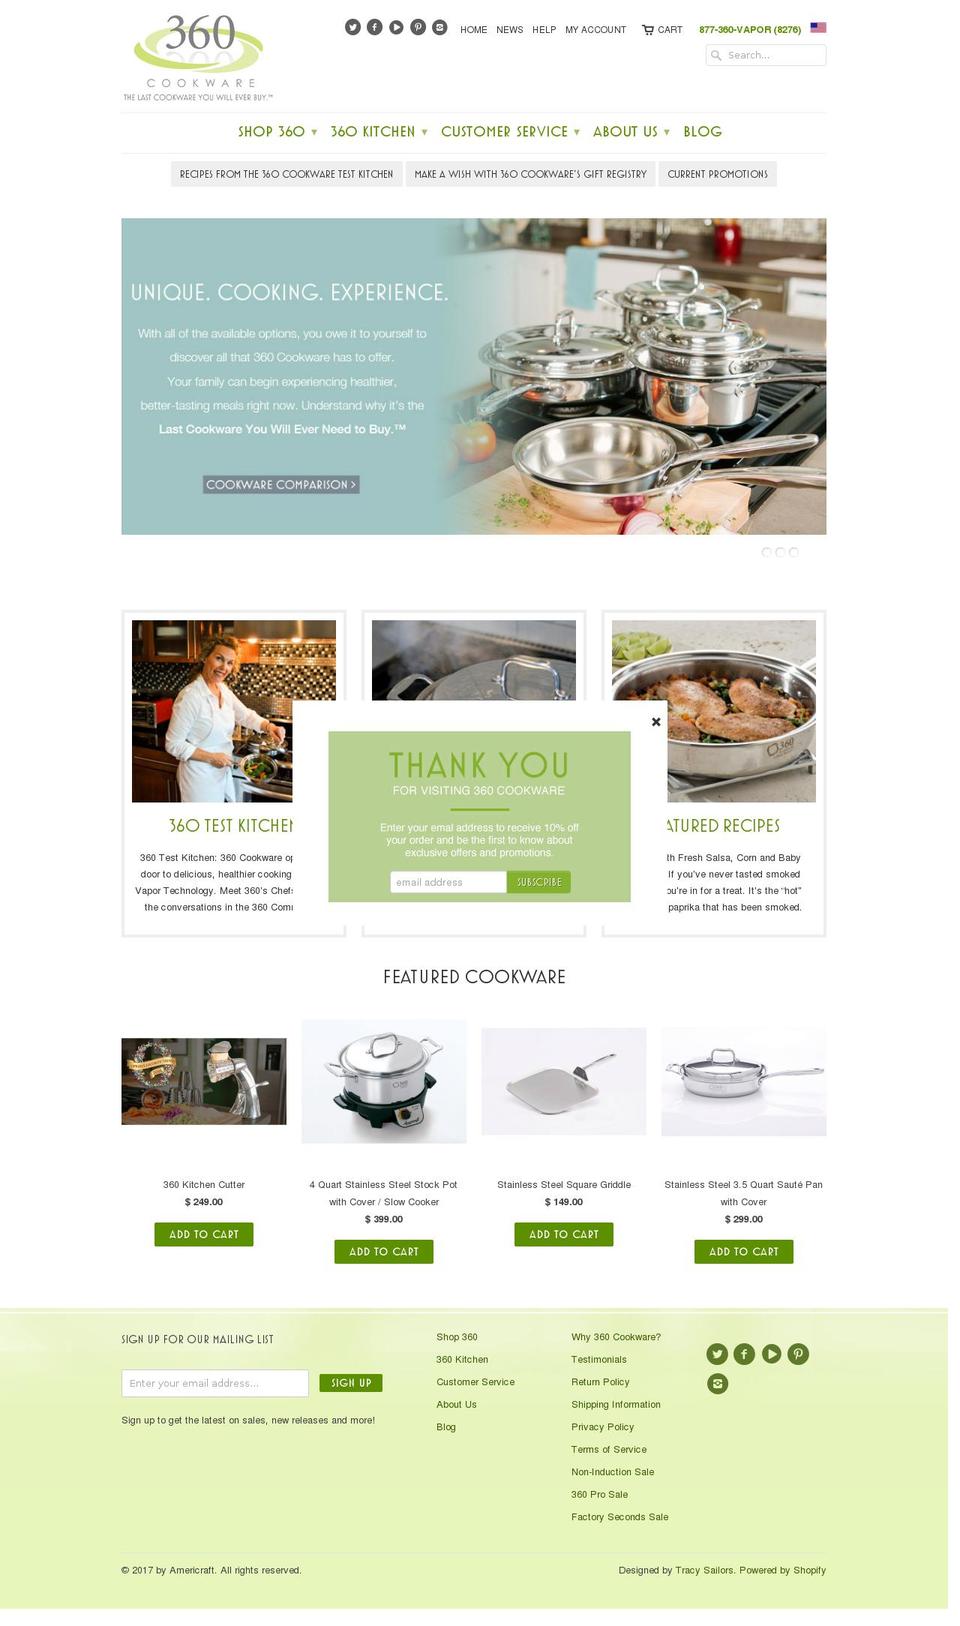 Broadcast Shopify theme site example 360cookware.com